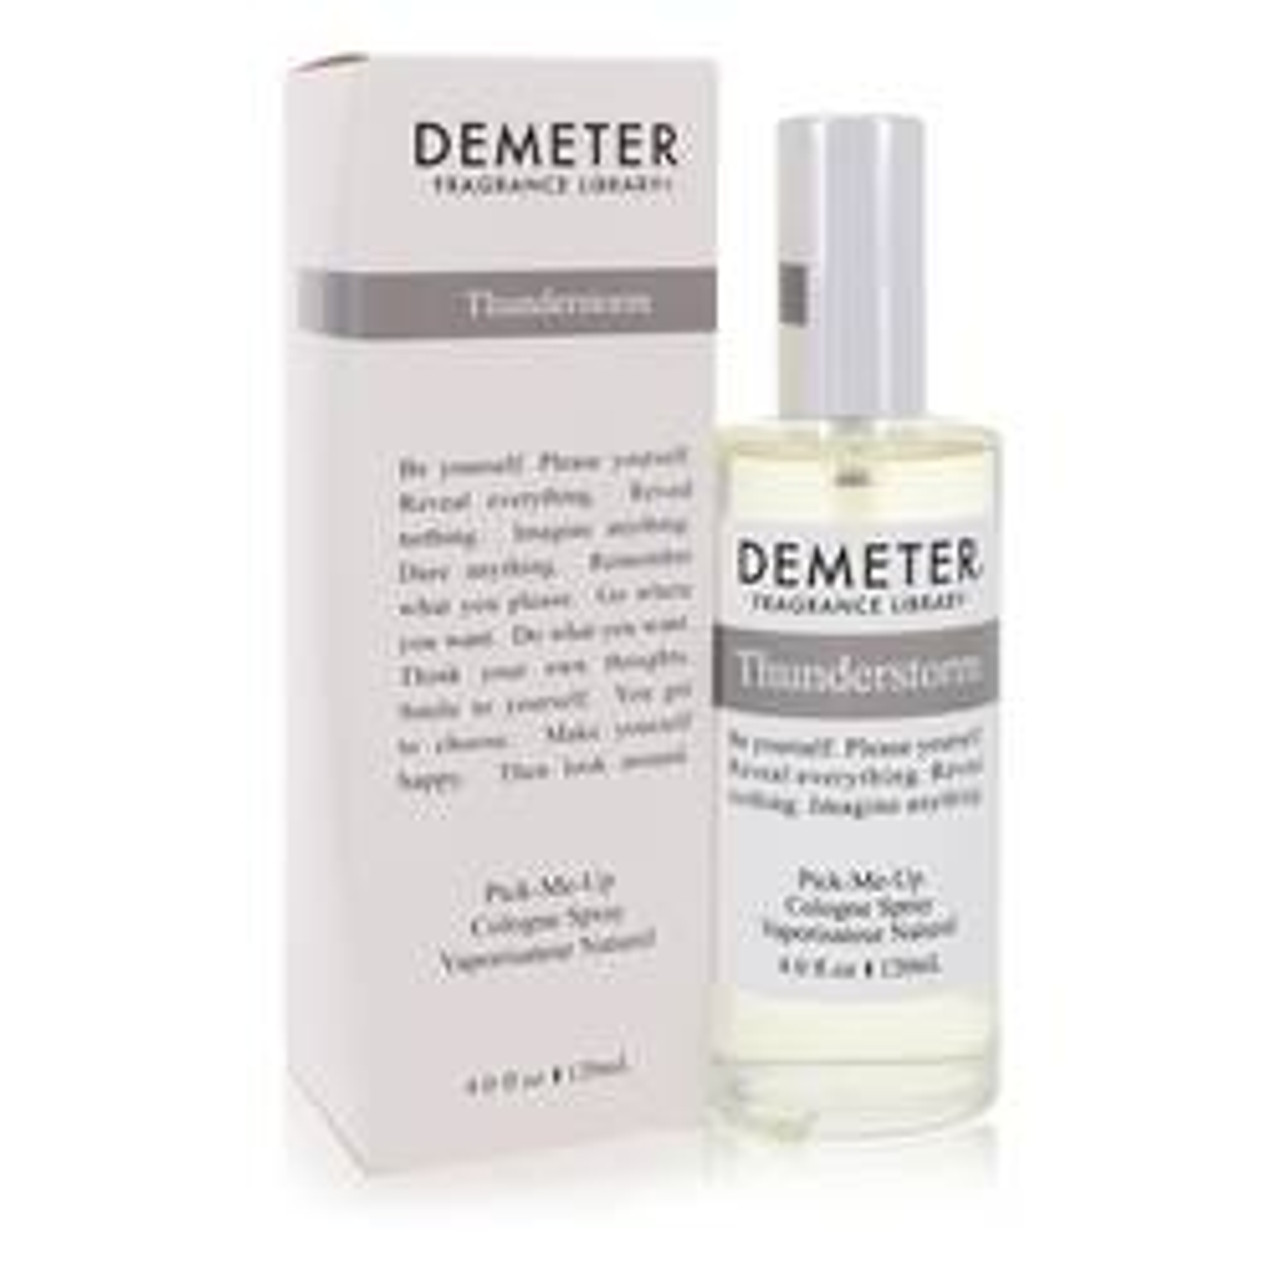 Demeter Thunderstorm Perfume By Demeter Cologne Spray 4 oz for Women - [From 79.50 - Choose pk Qty ] - *Ships from Miami